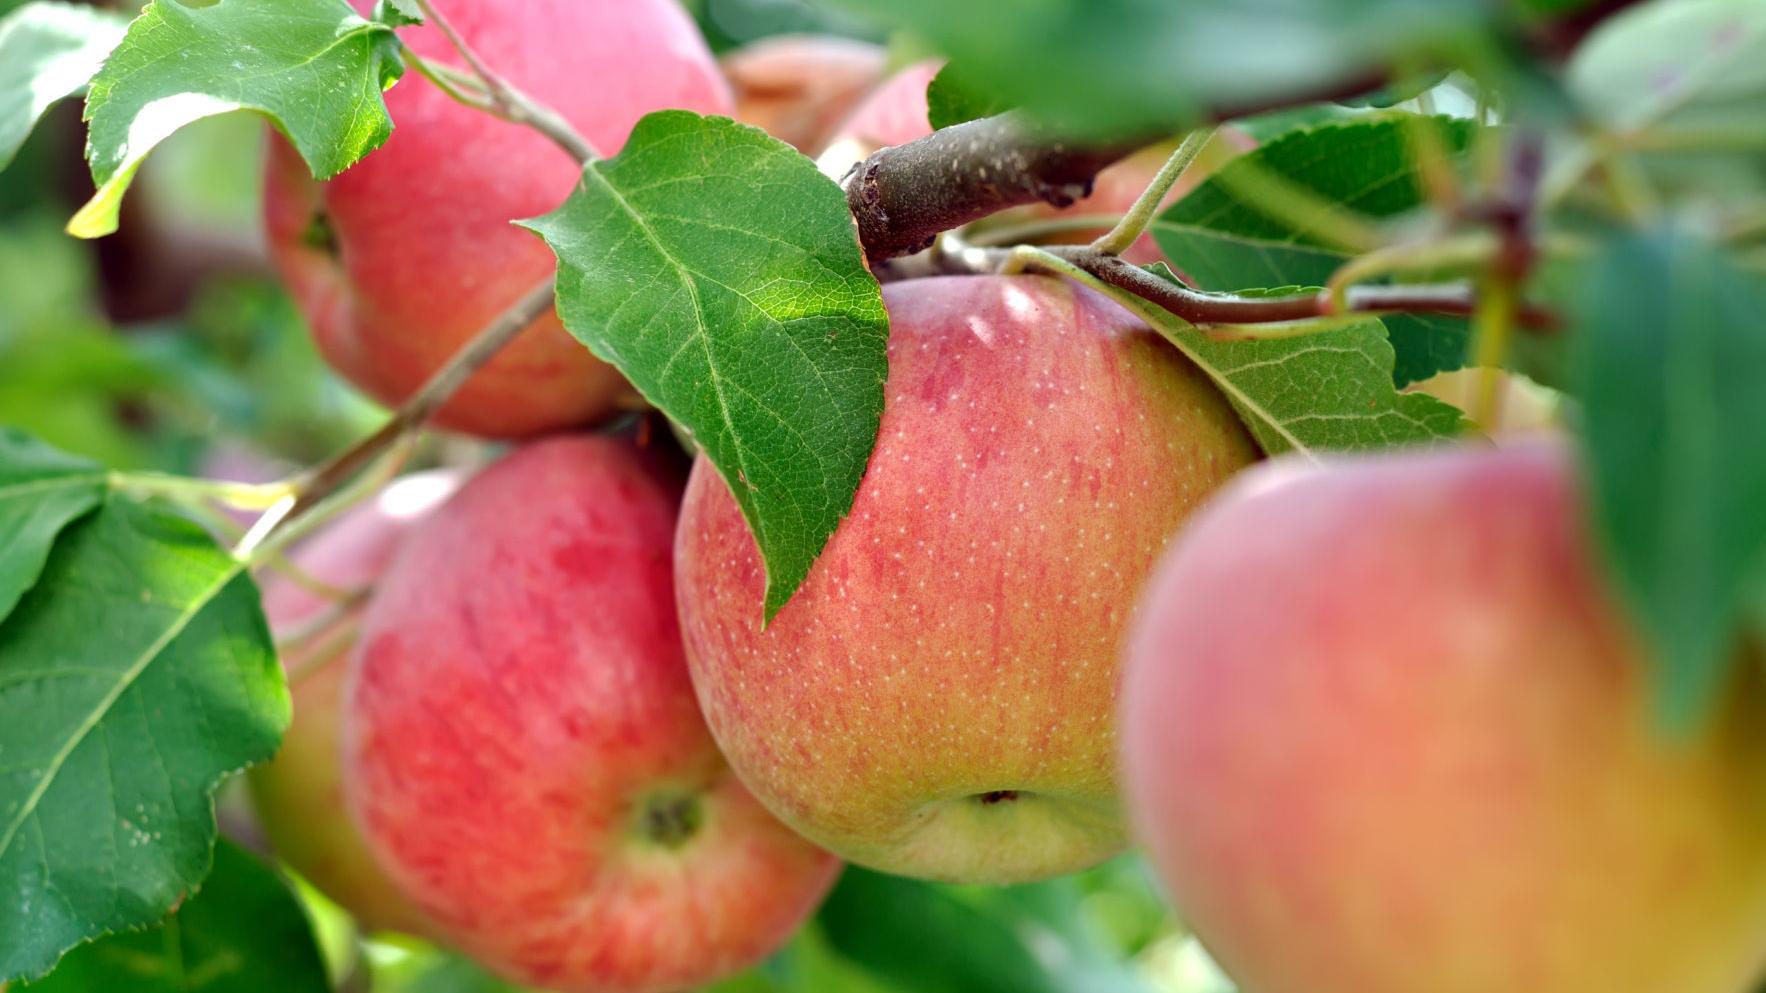 Dirty Fingernails Some Tips For Worm Free Apples Without Spraying